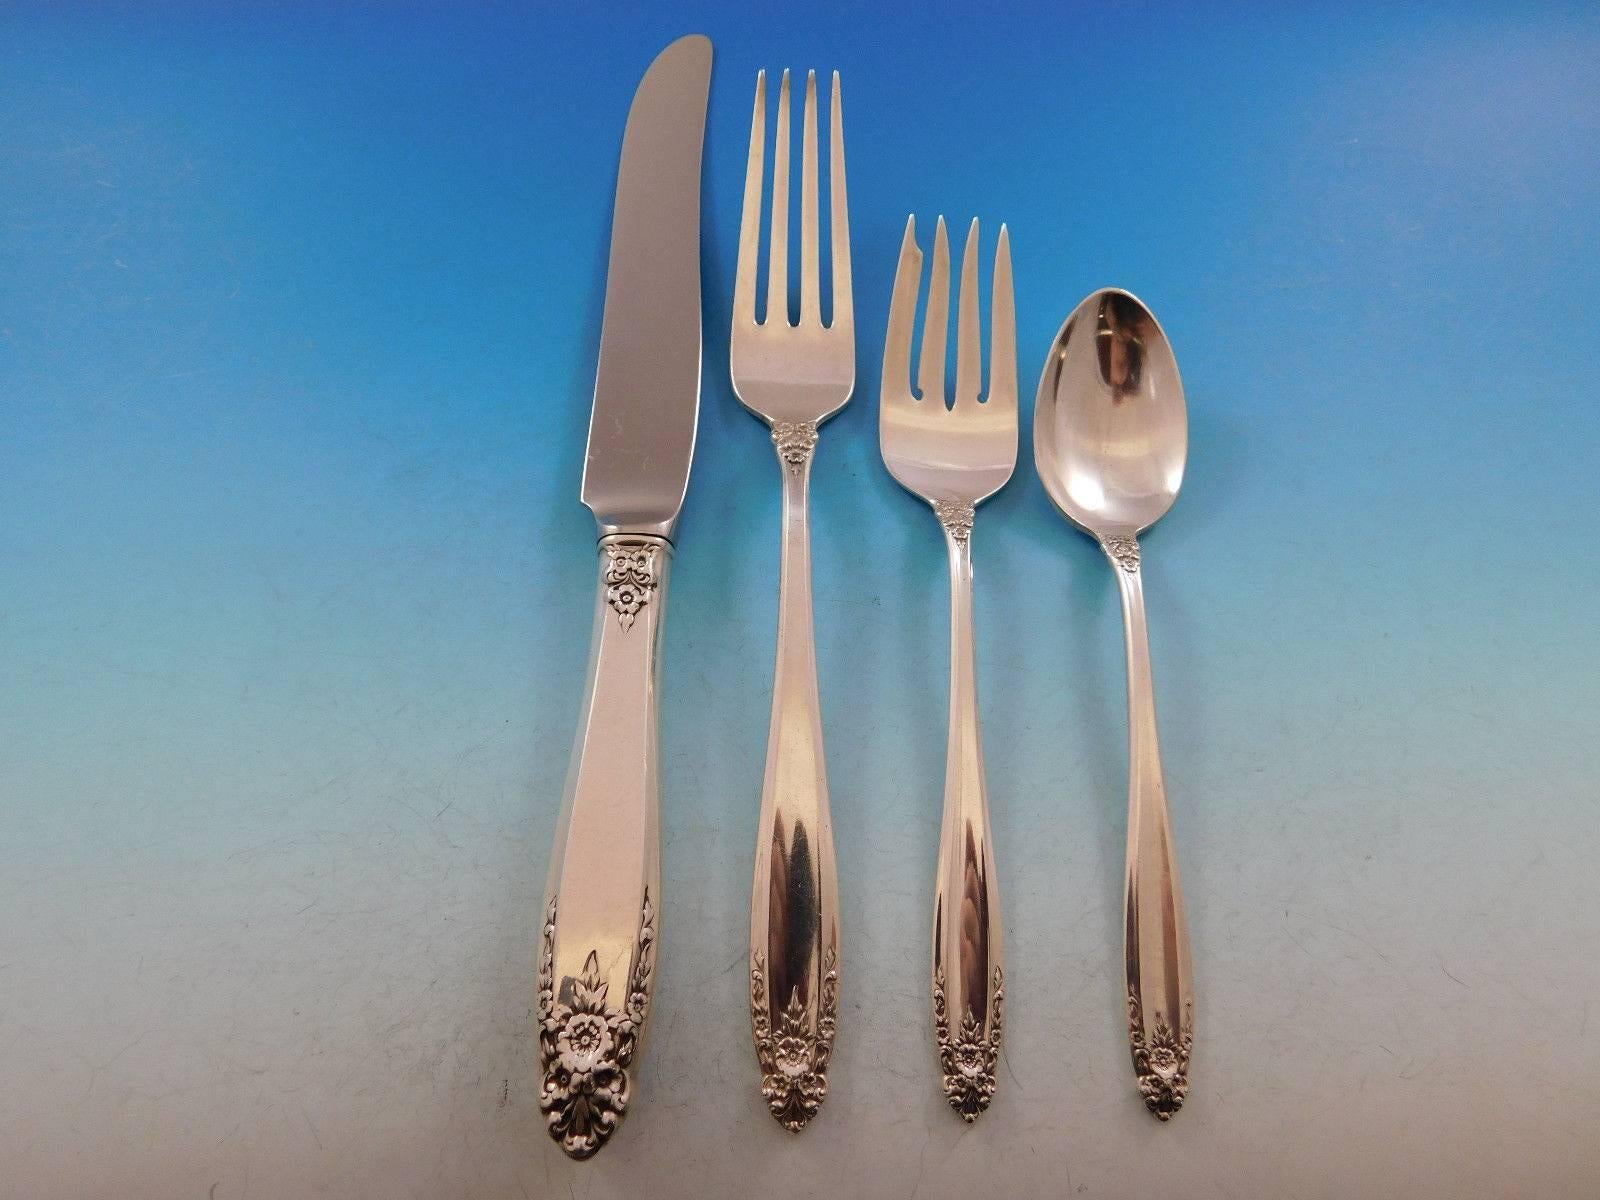 KNIFE,SP FORKS 4 pc International Prelude Sterling Silver Four Piece Setting